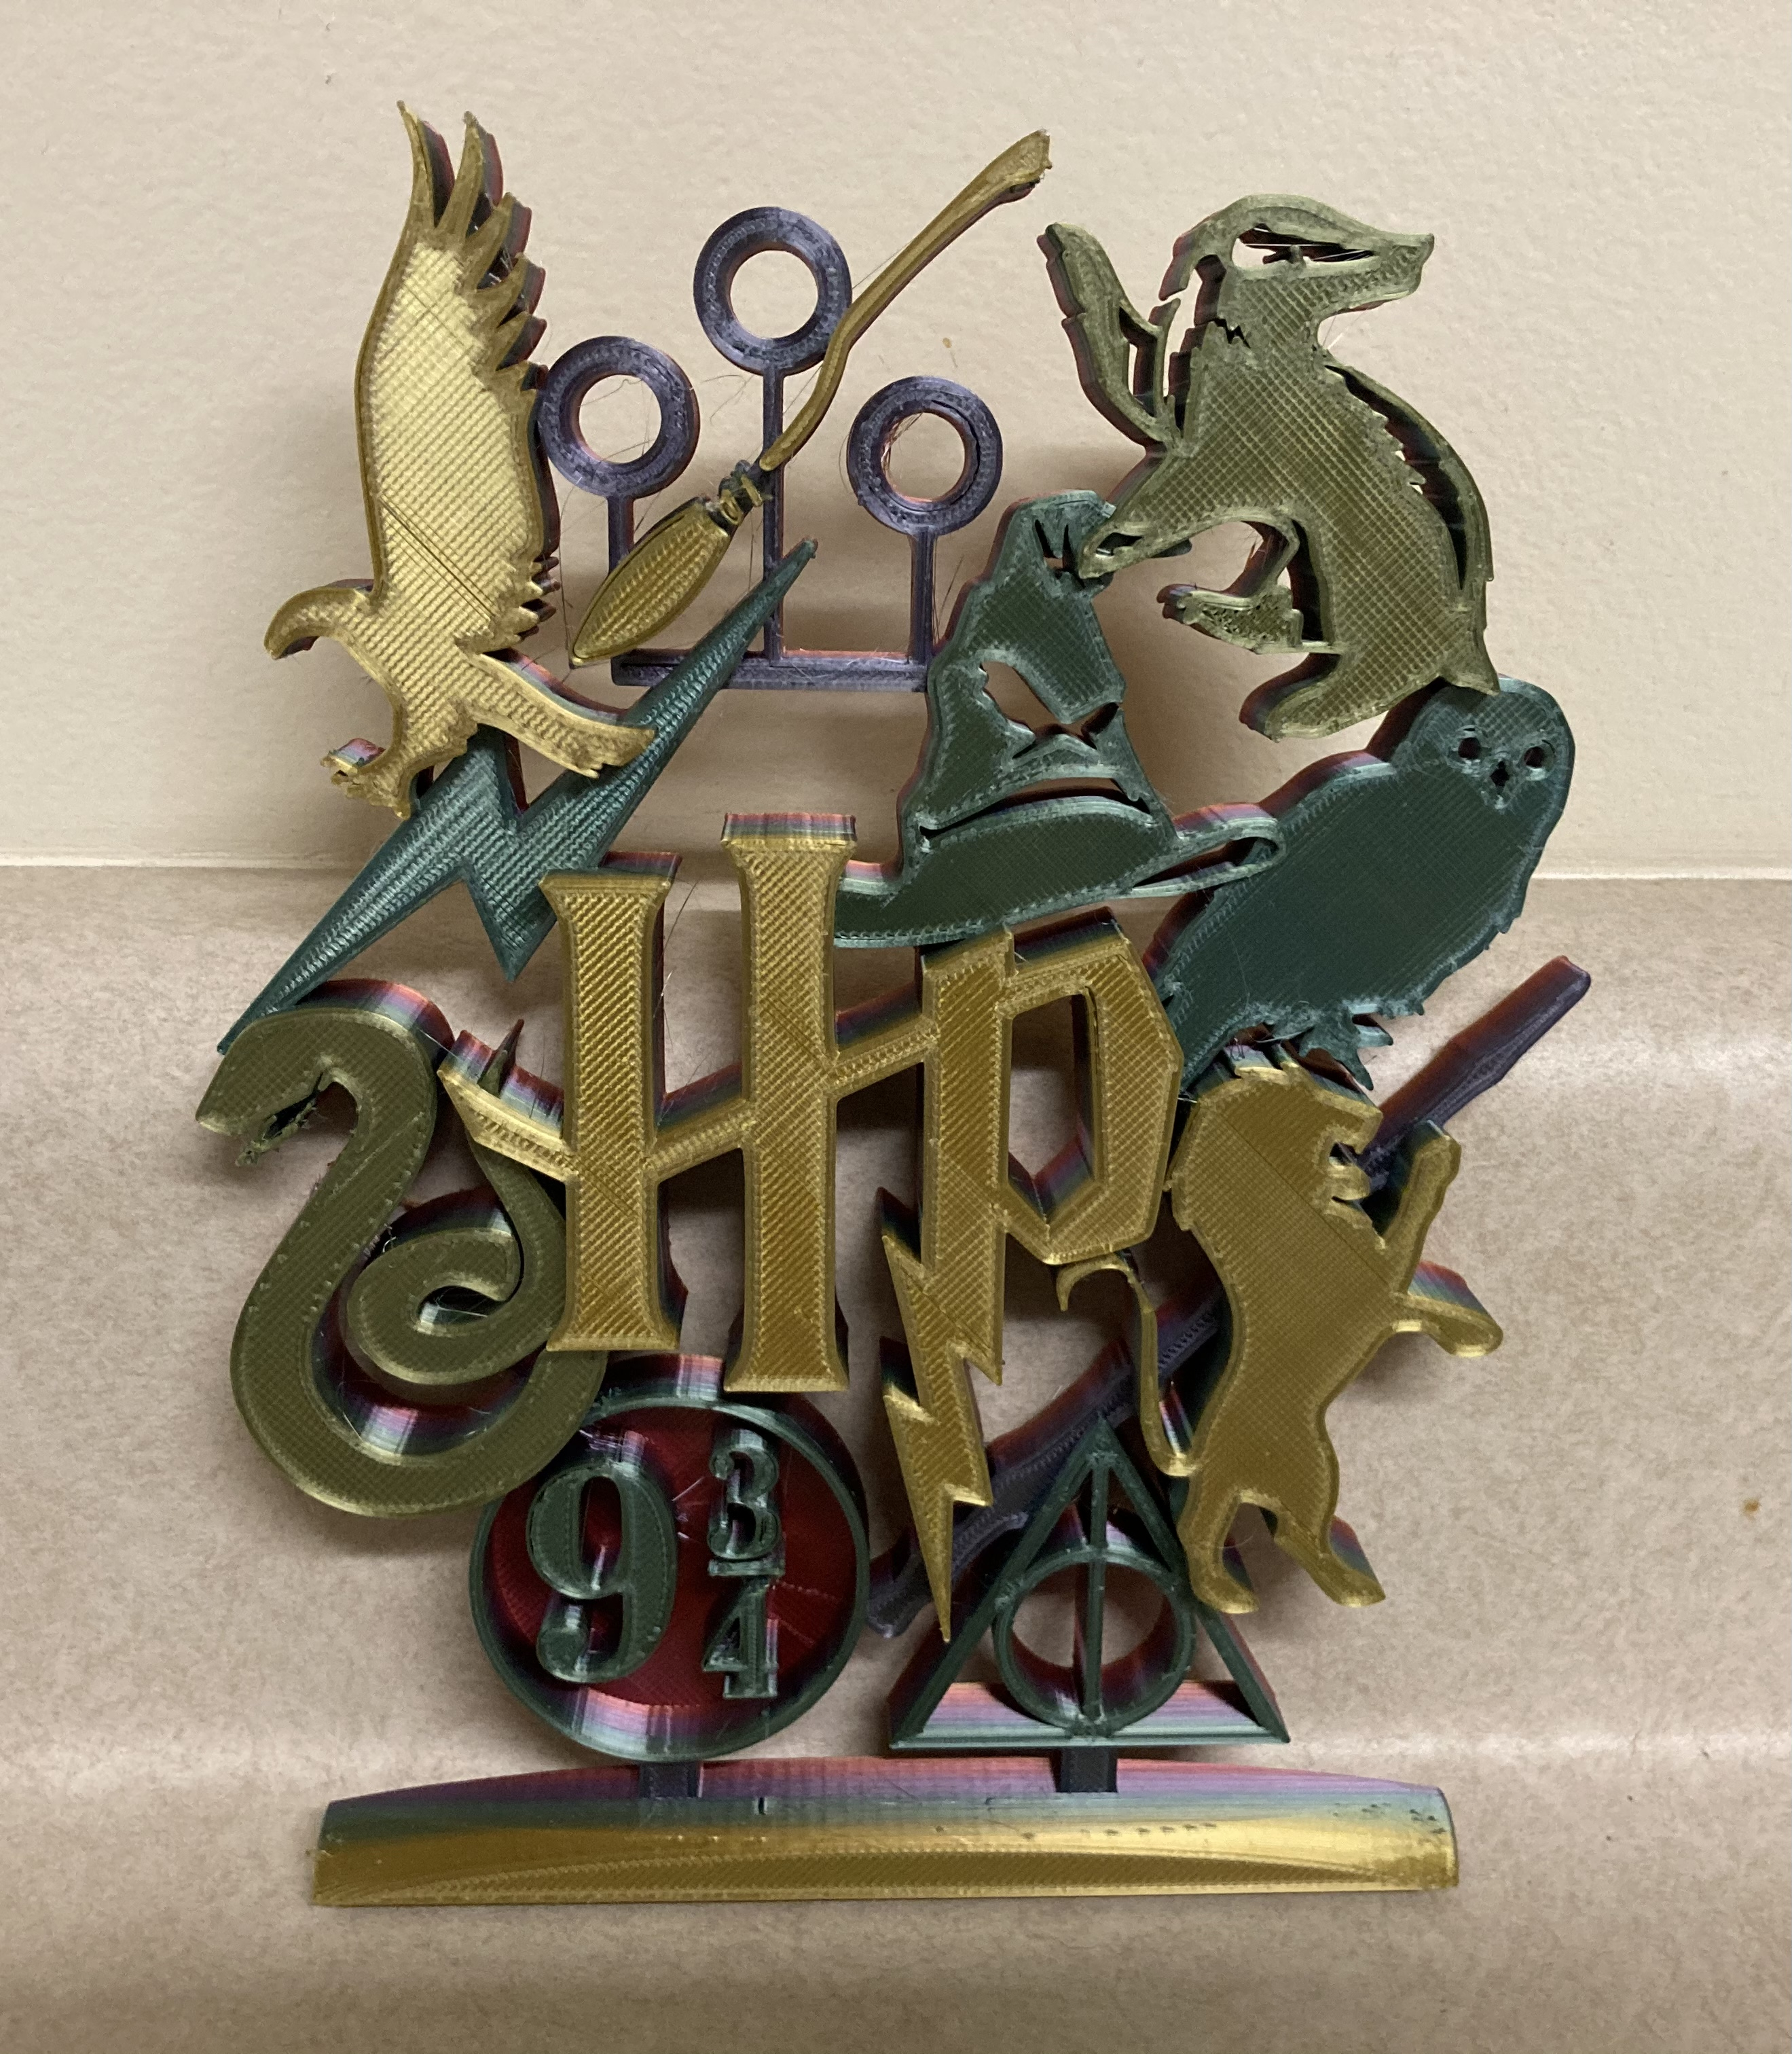 3D Printable Harry Potter Ornament by Natalie Cheesmond